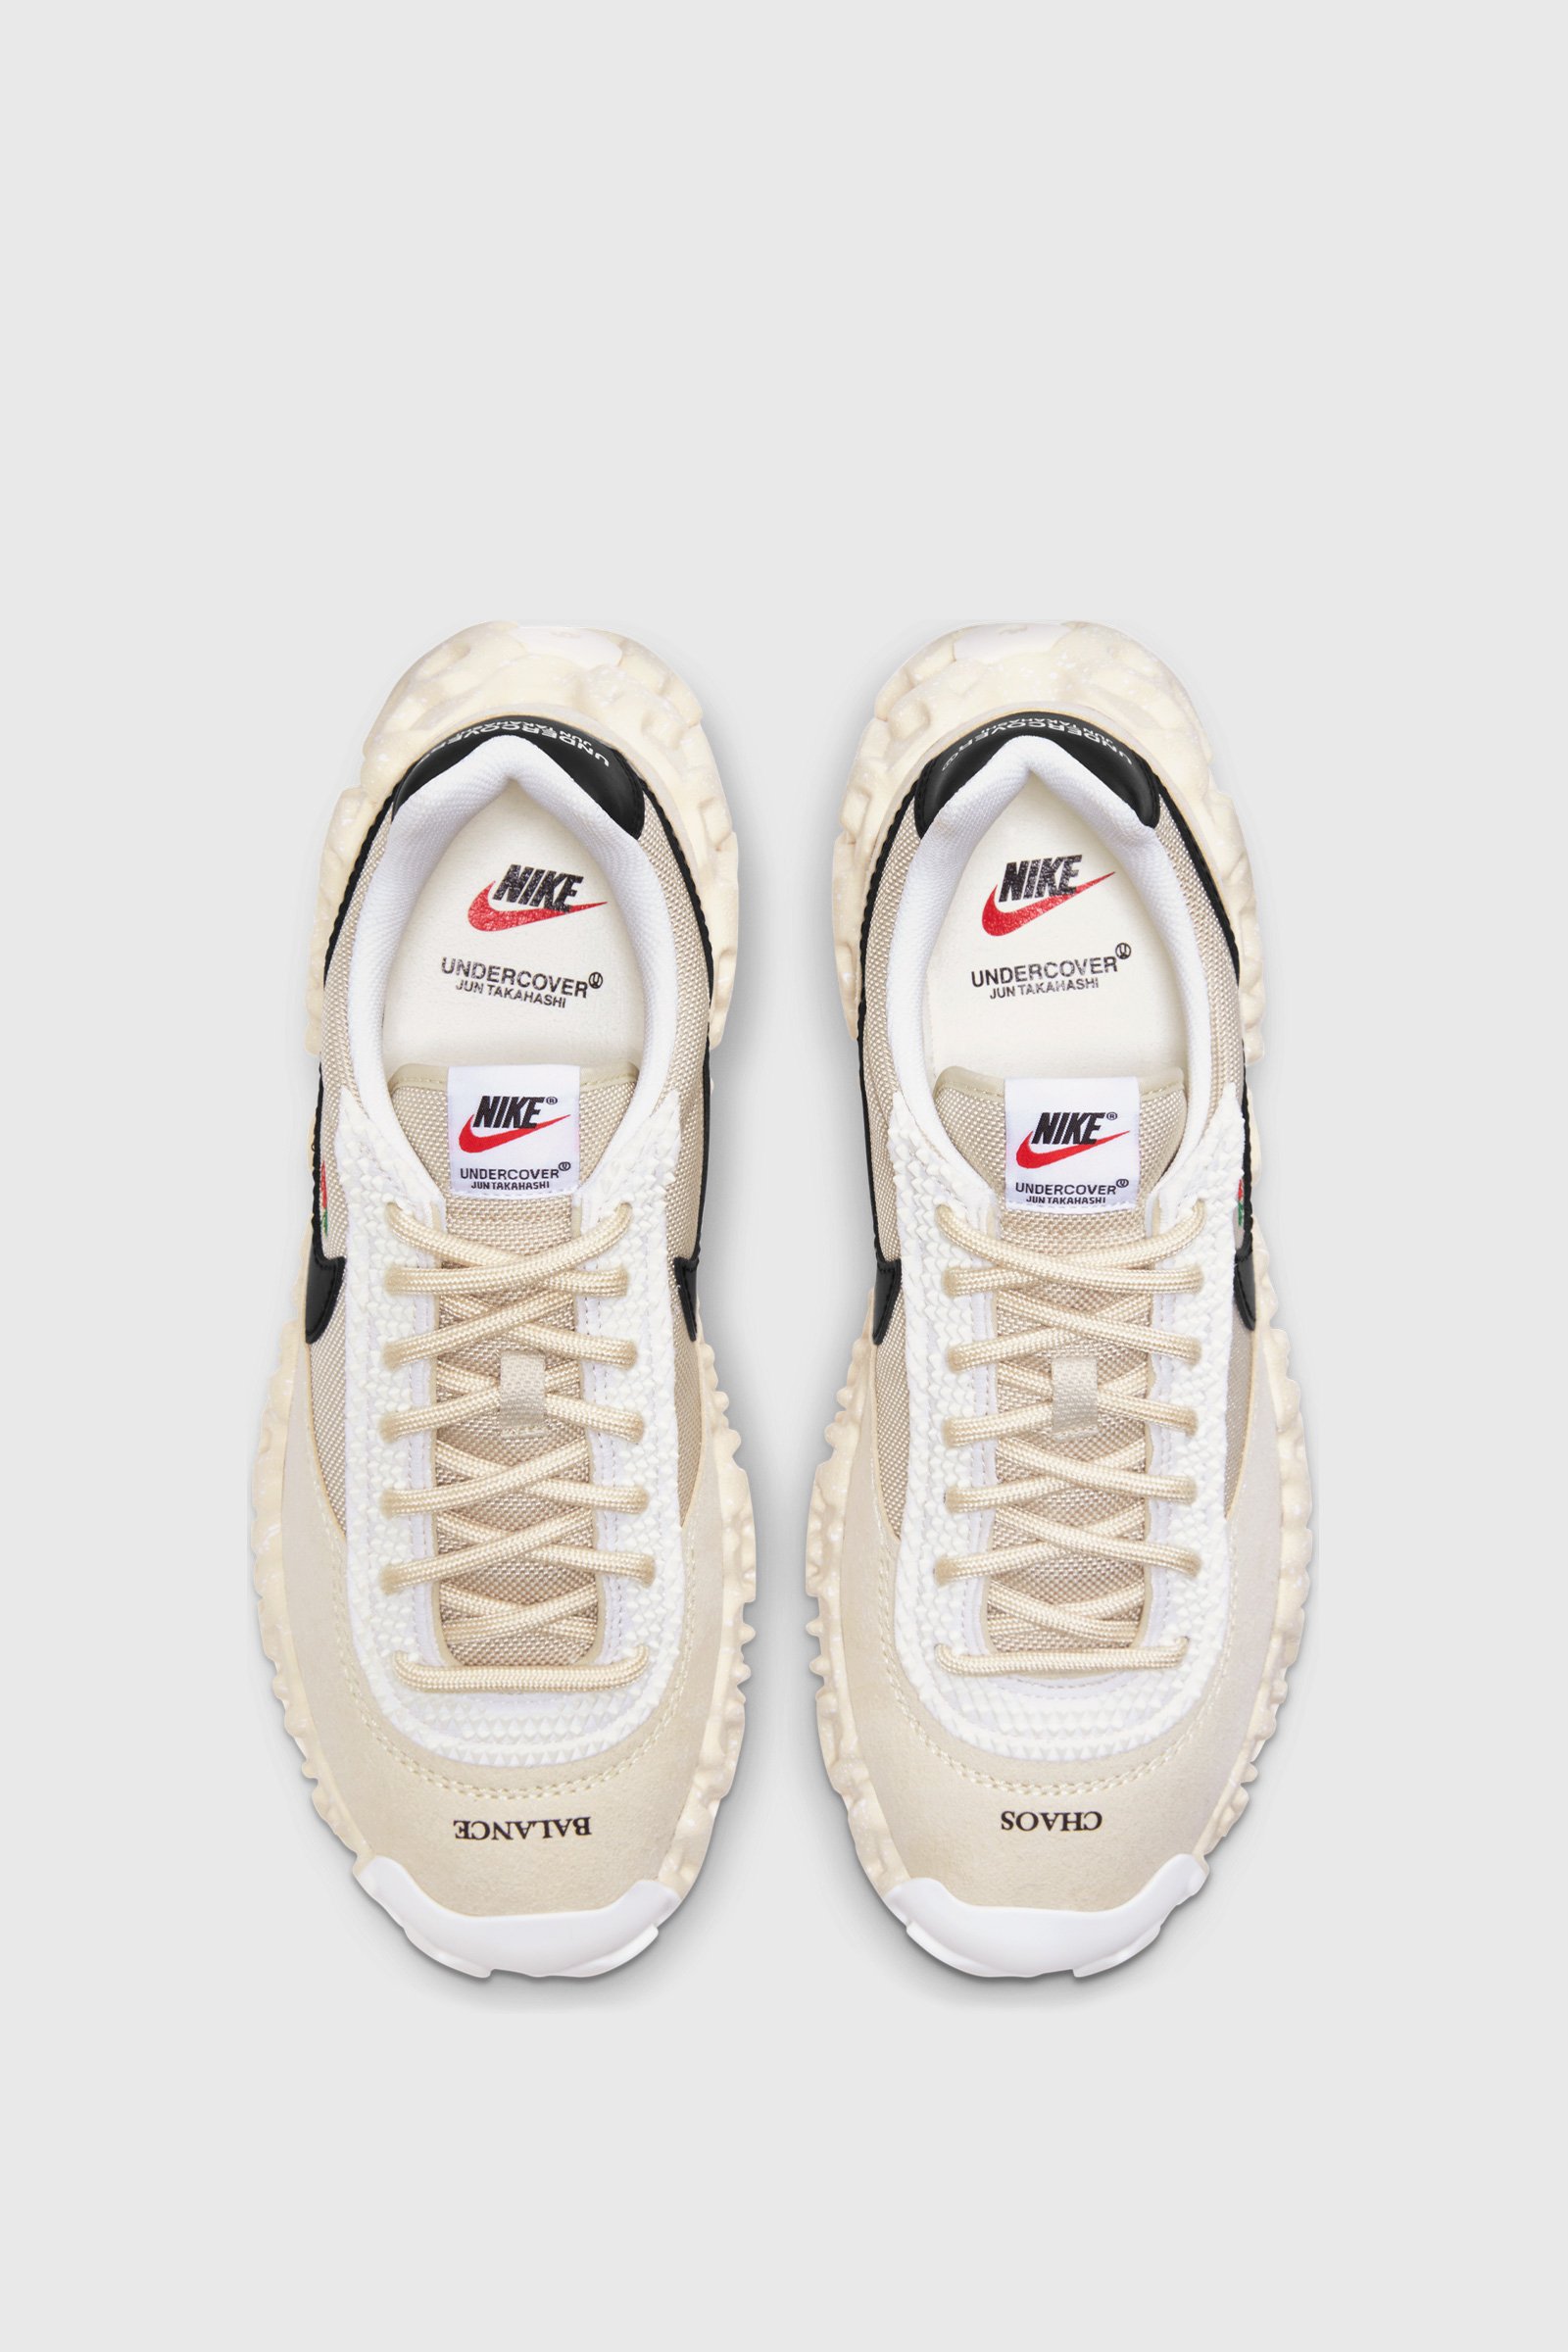 Nike Nike Overbreak / Undercover Overcast fossil sail (200) | WoodWood.com